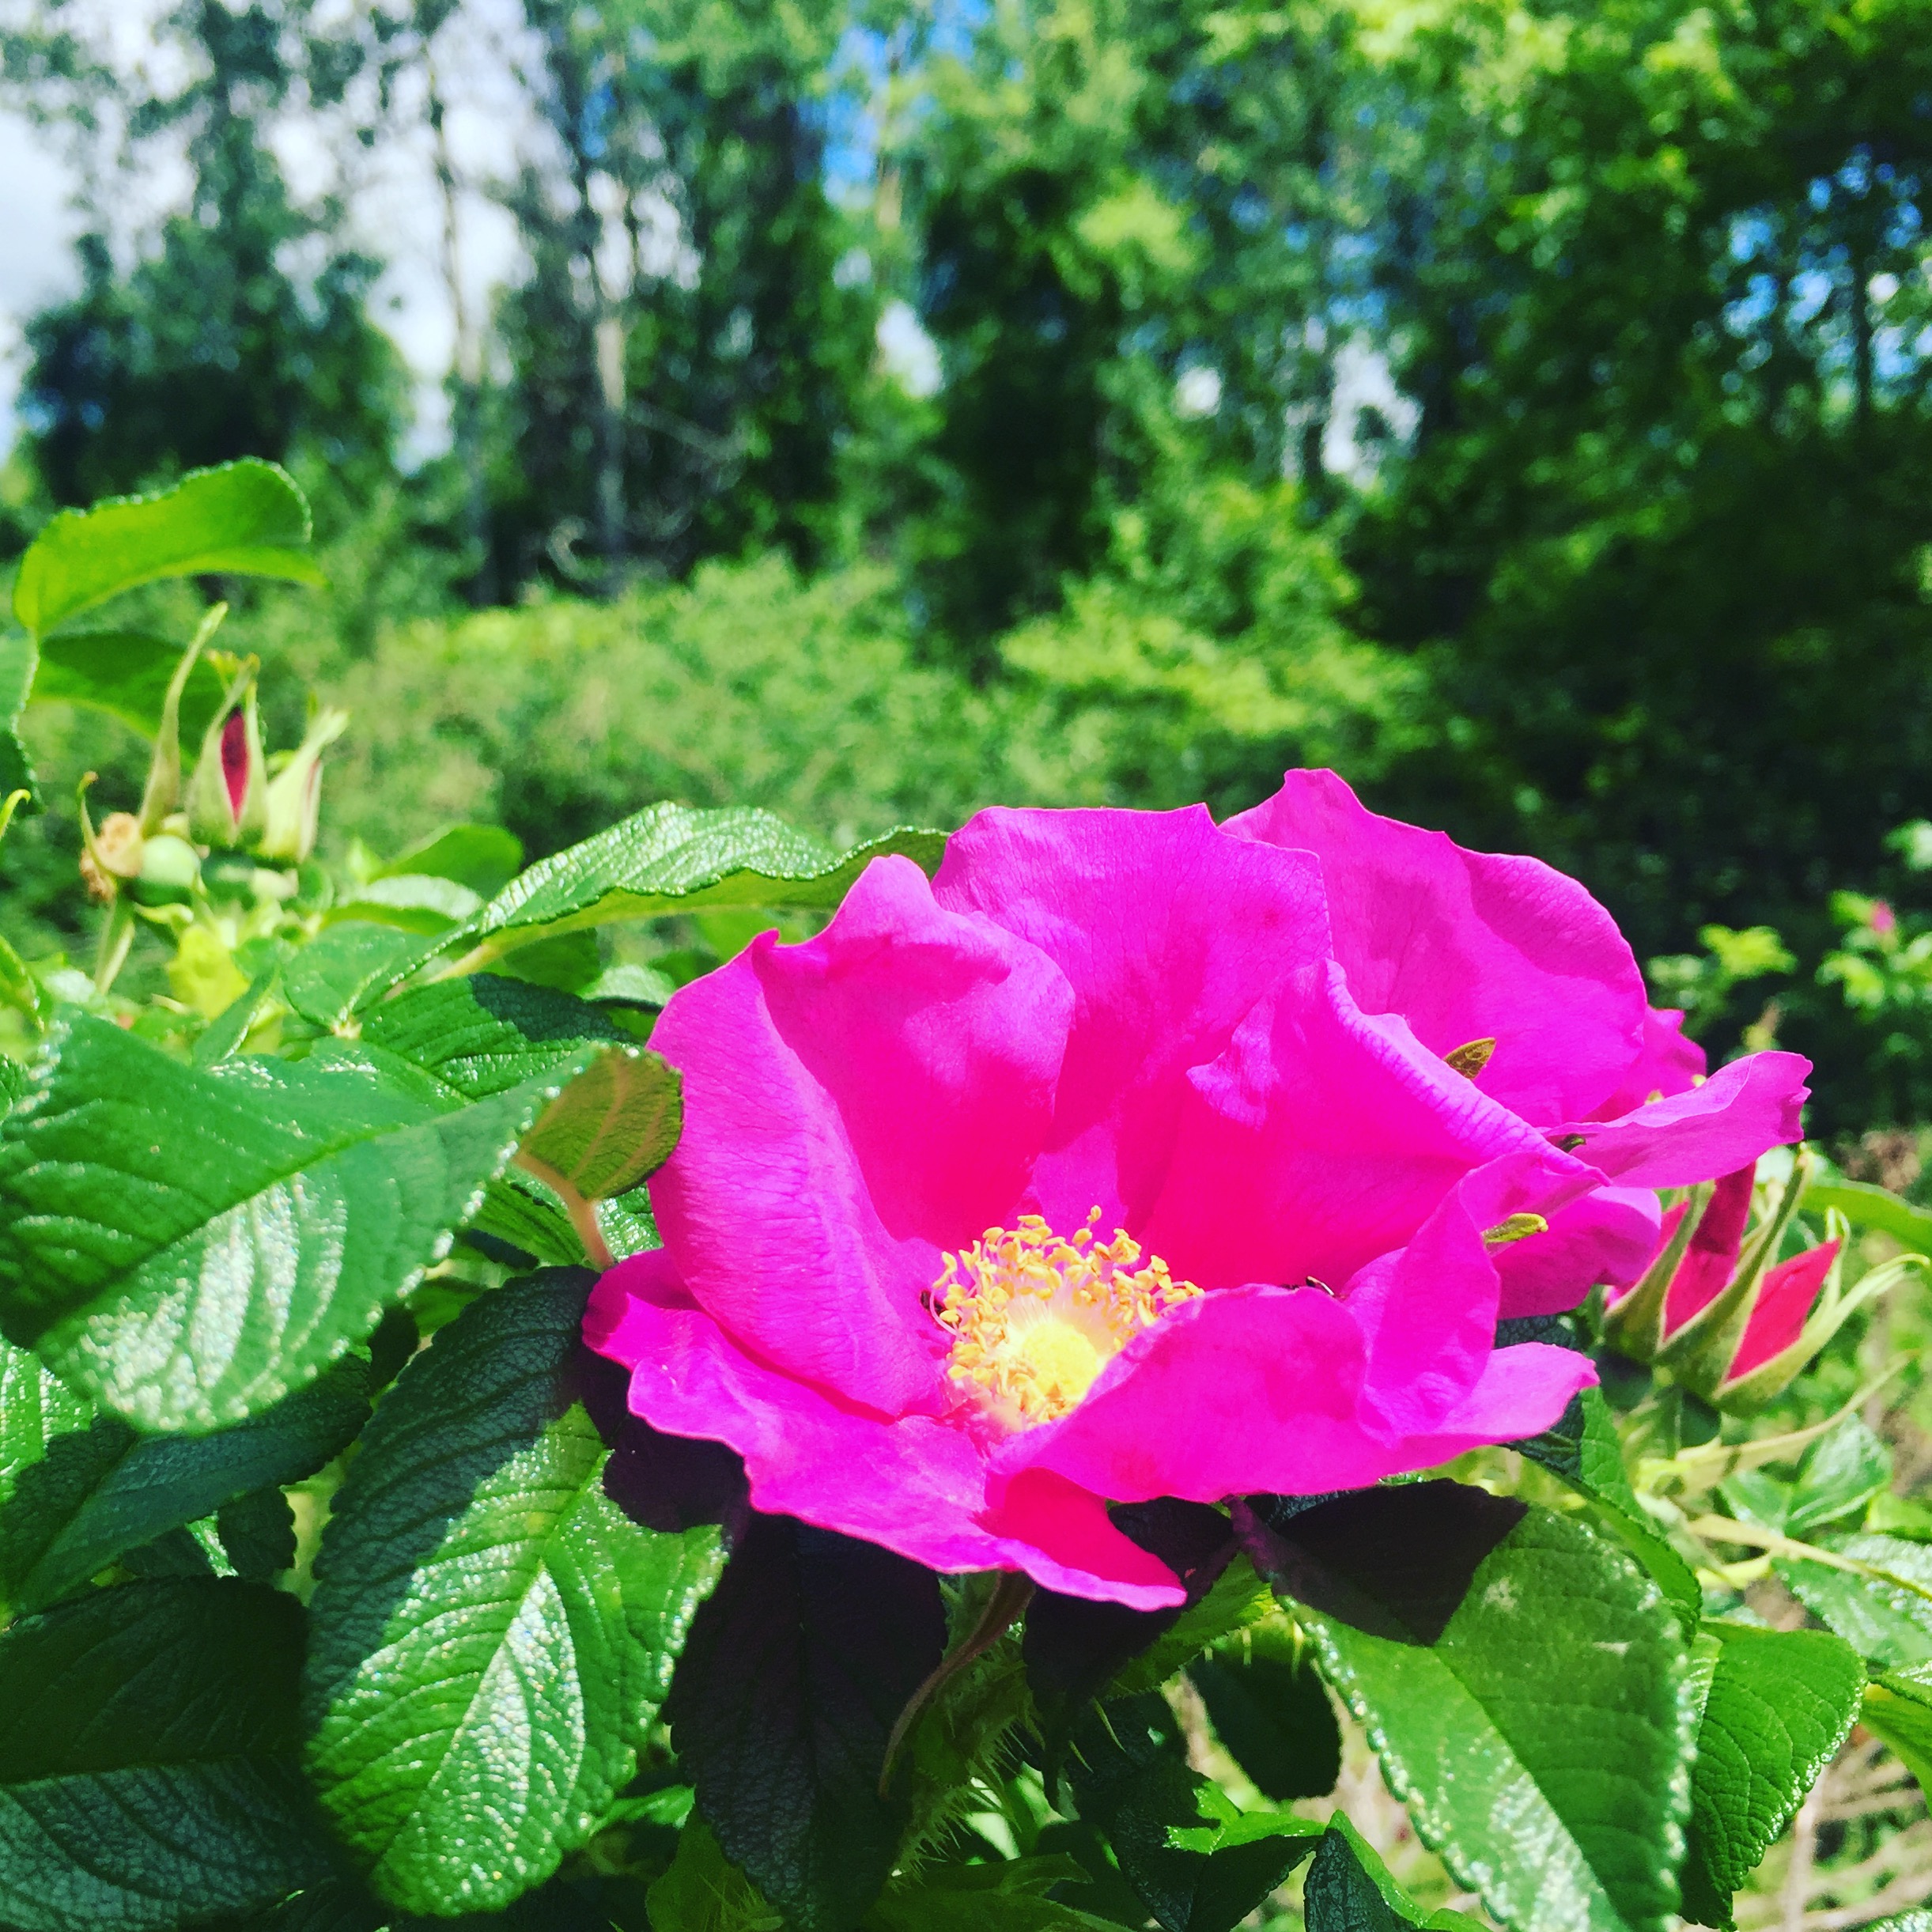  The flush of roses has begun! Rosa rugosa blooms all season, until the first frost, but for a few weeks in June, the volume of blooms is much greater. Each day, I handpick rose chafer pests from the plants, then harvest the rose petals, and finally 